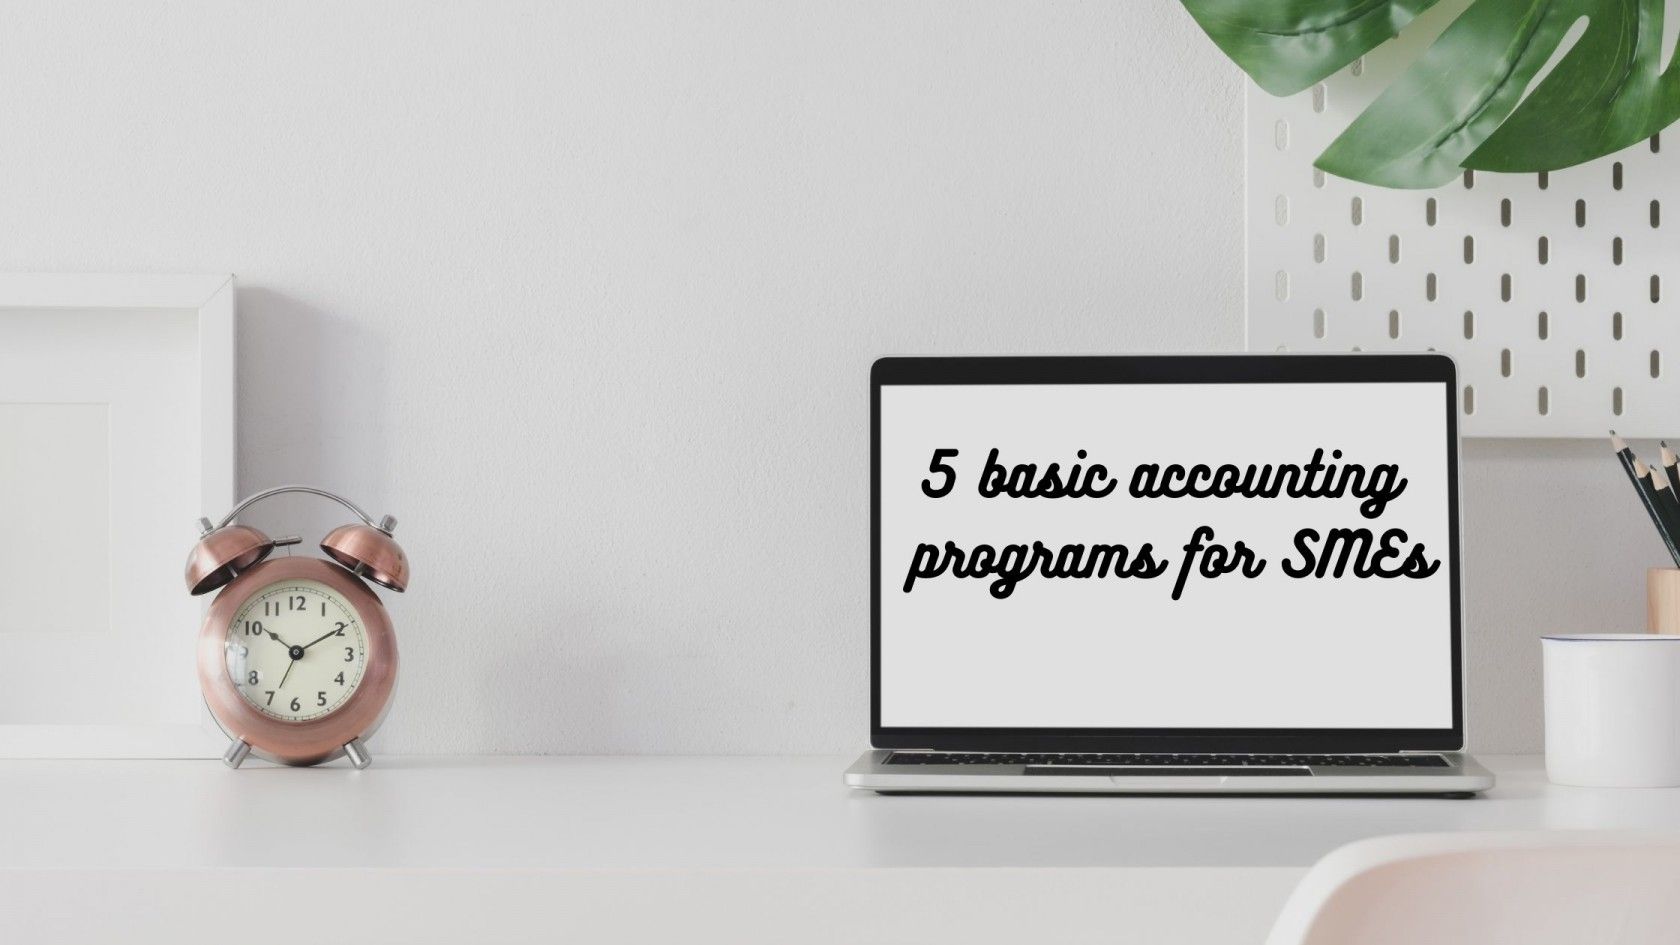 5 basic accounting programs for SMEs>